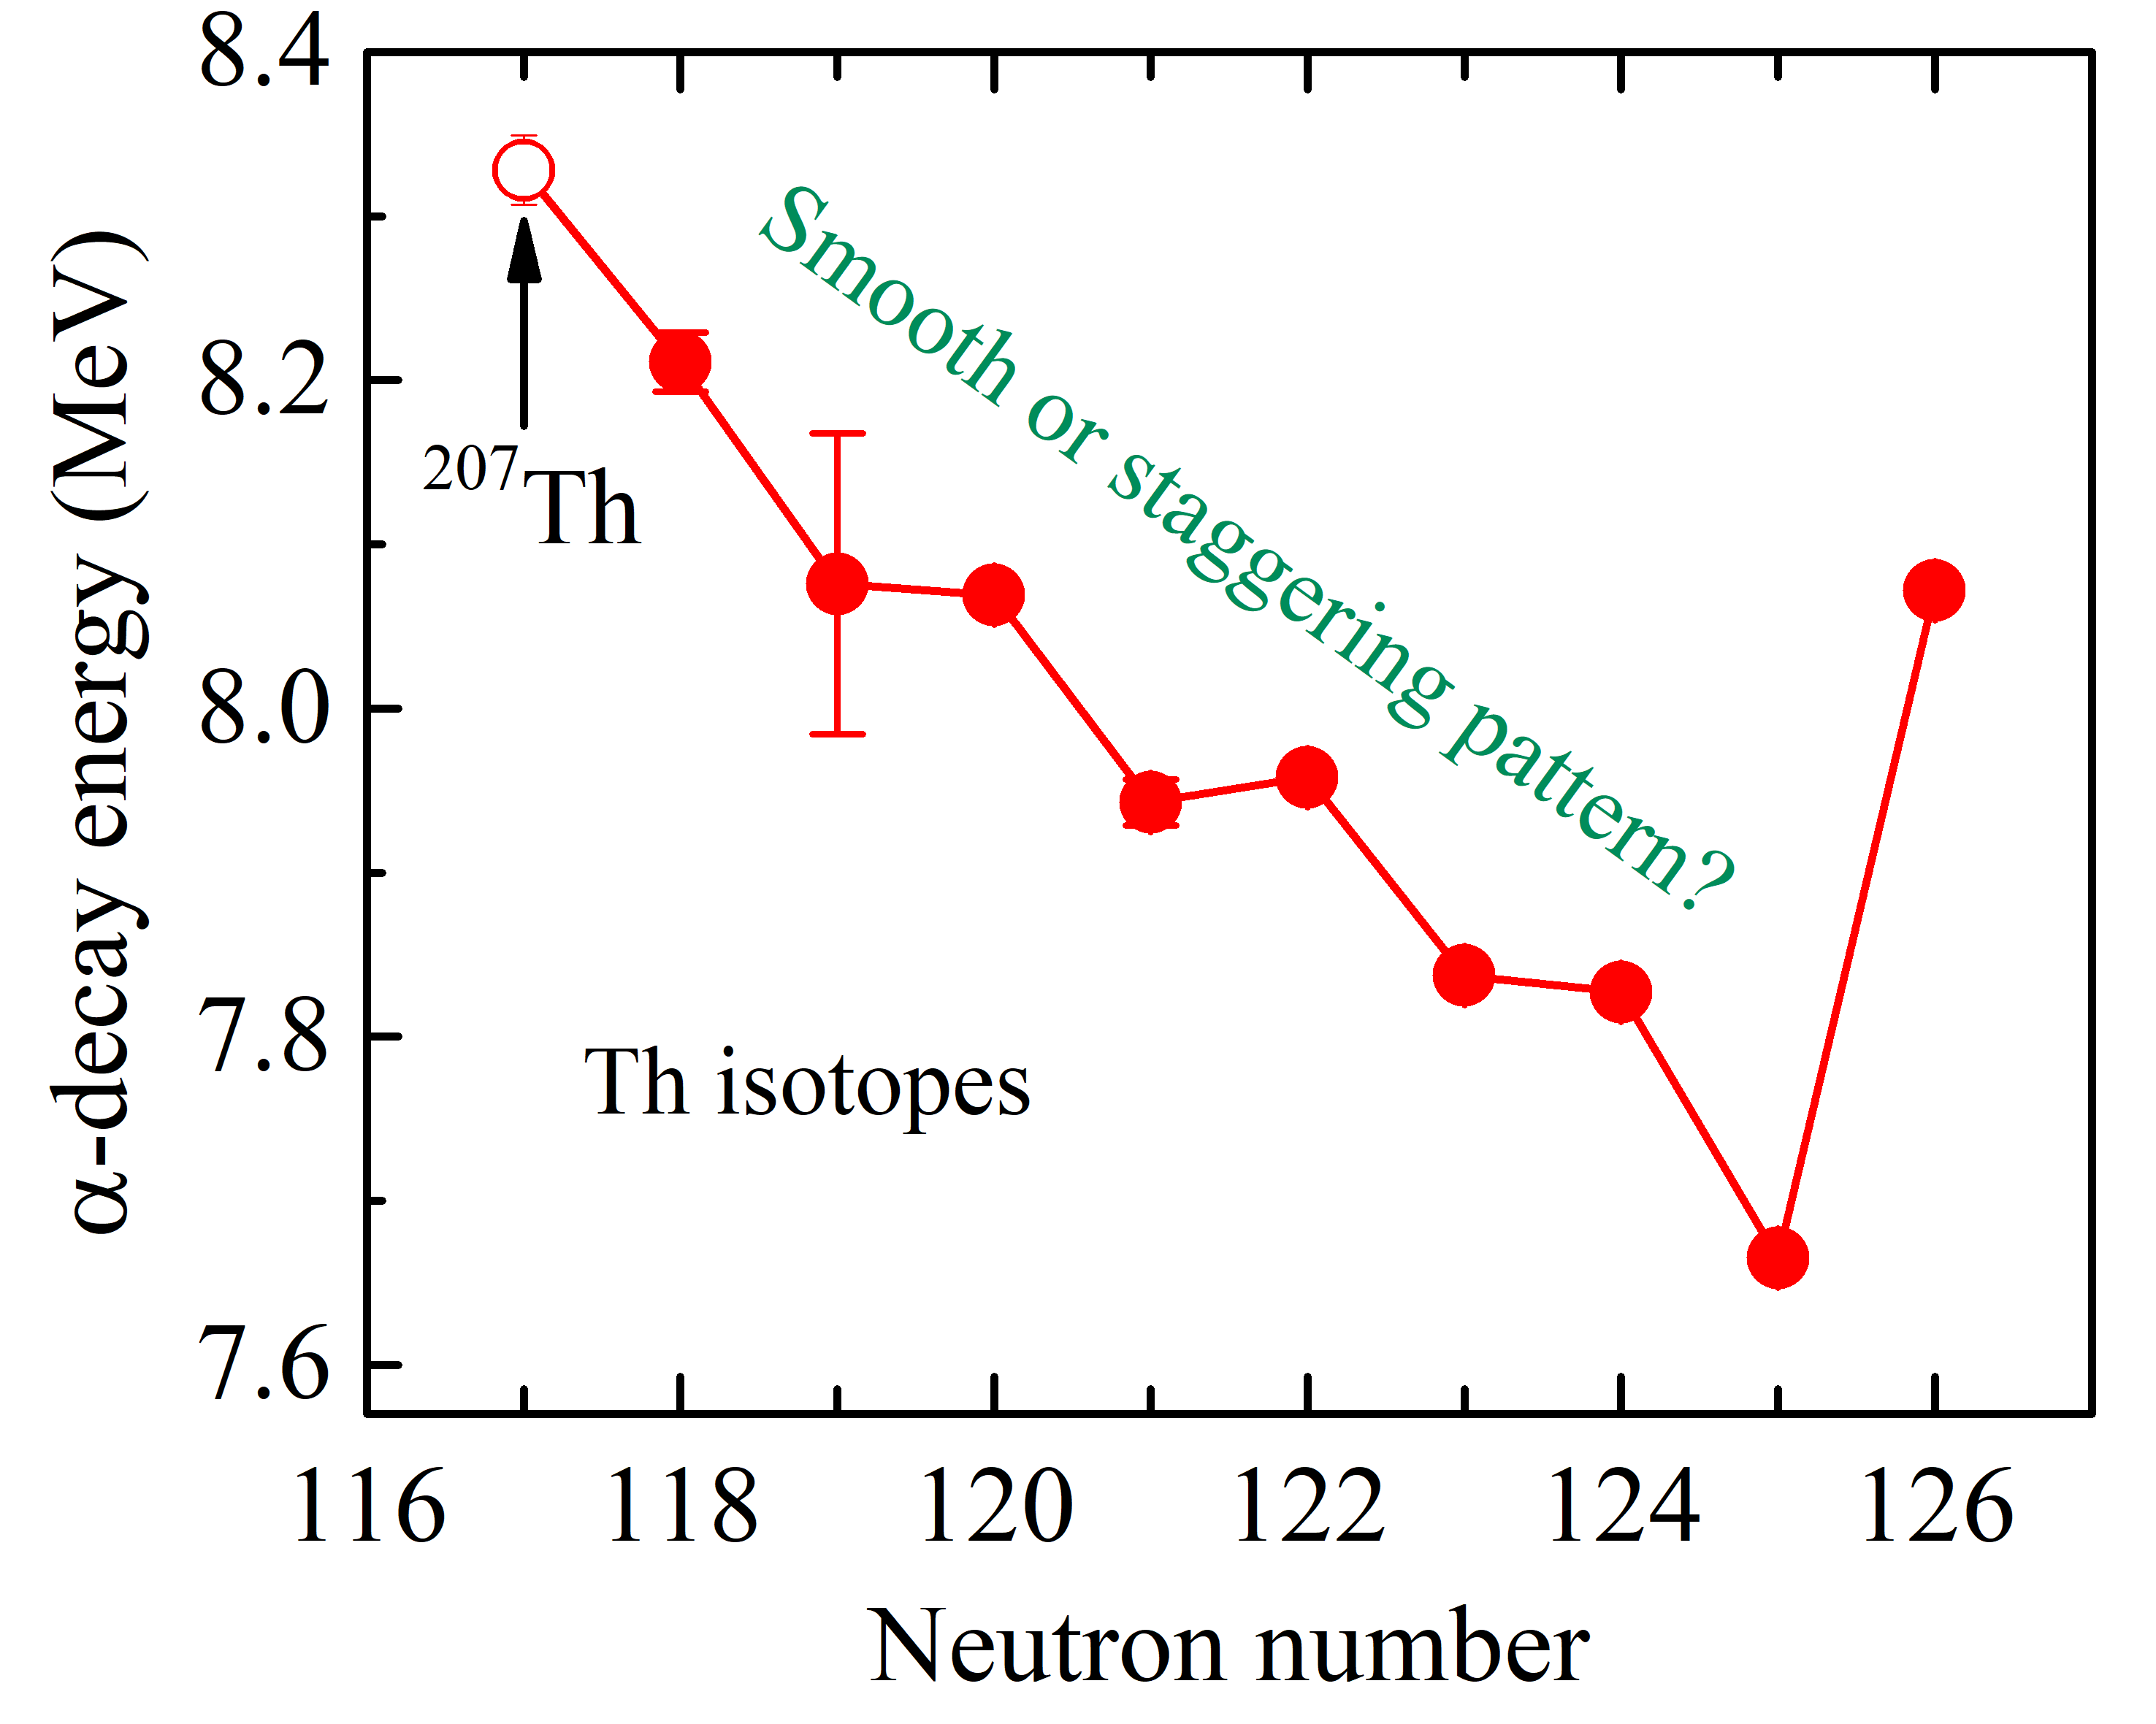 New isotope and OES in α-decay energies